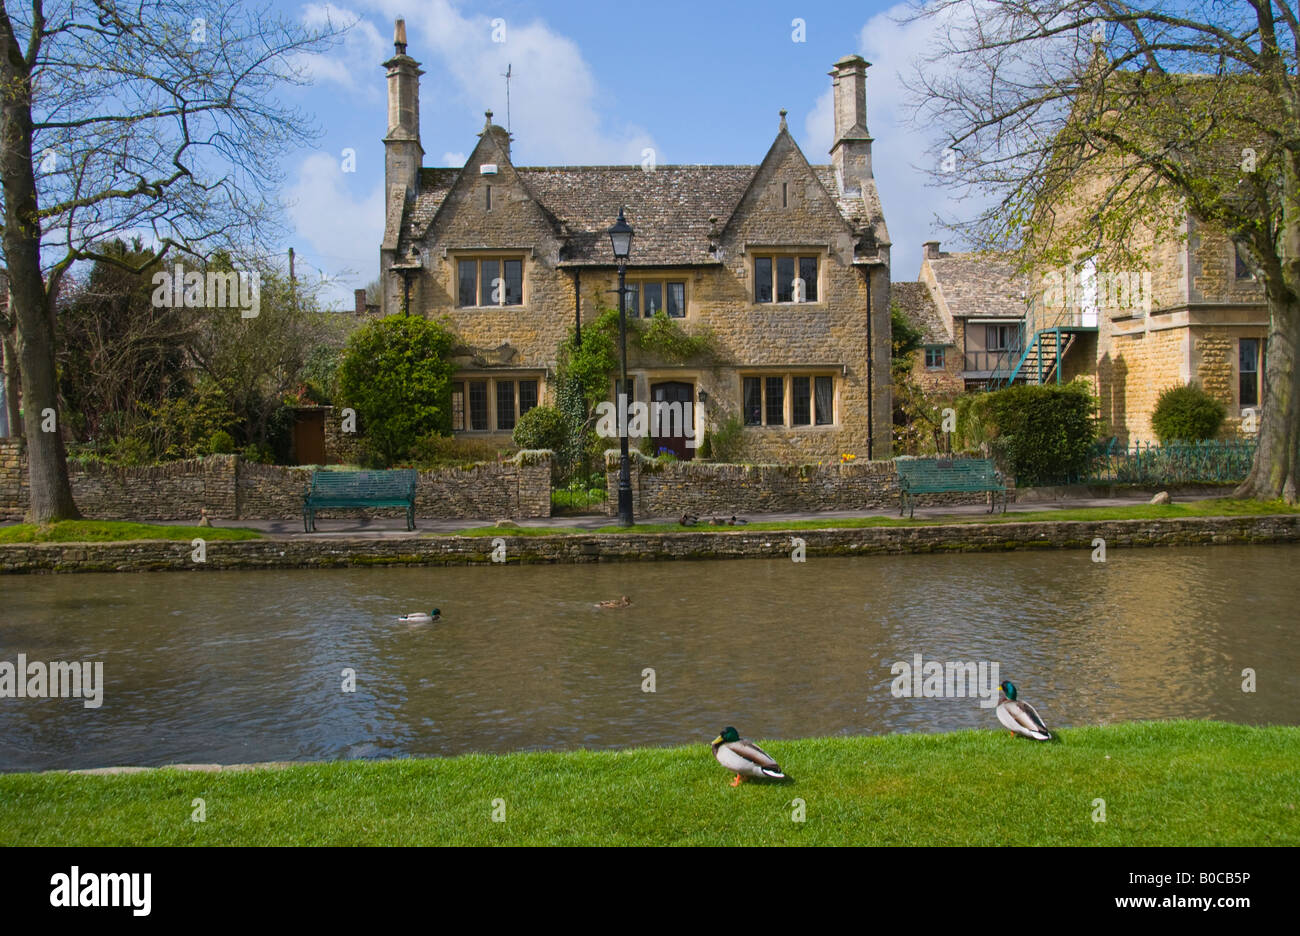 Detached period house on River Windrush in village of Bourton on the Water Cotswolds England UK Stock Photo